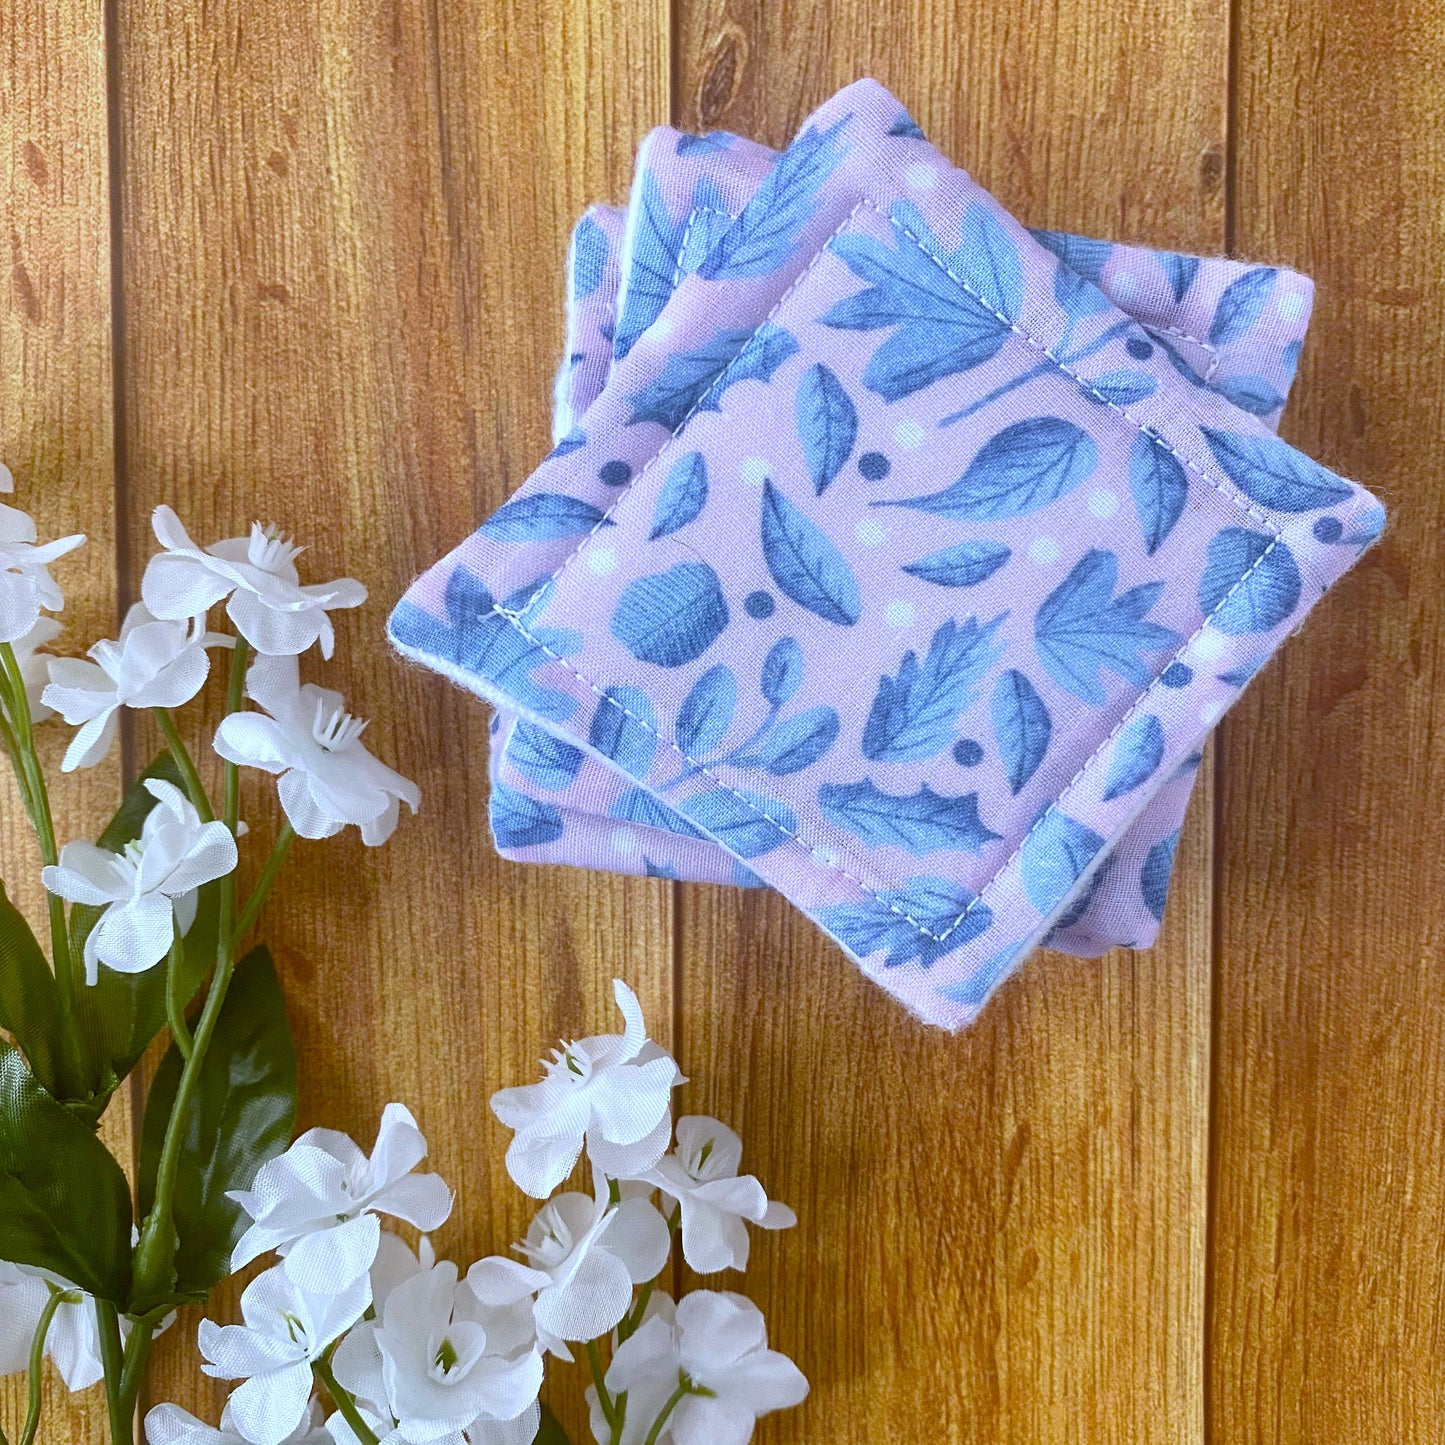 blue and pink foliage pattern on square skincare pads in a pile next to some flowers on a wooden background